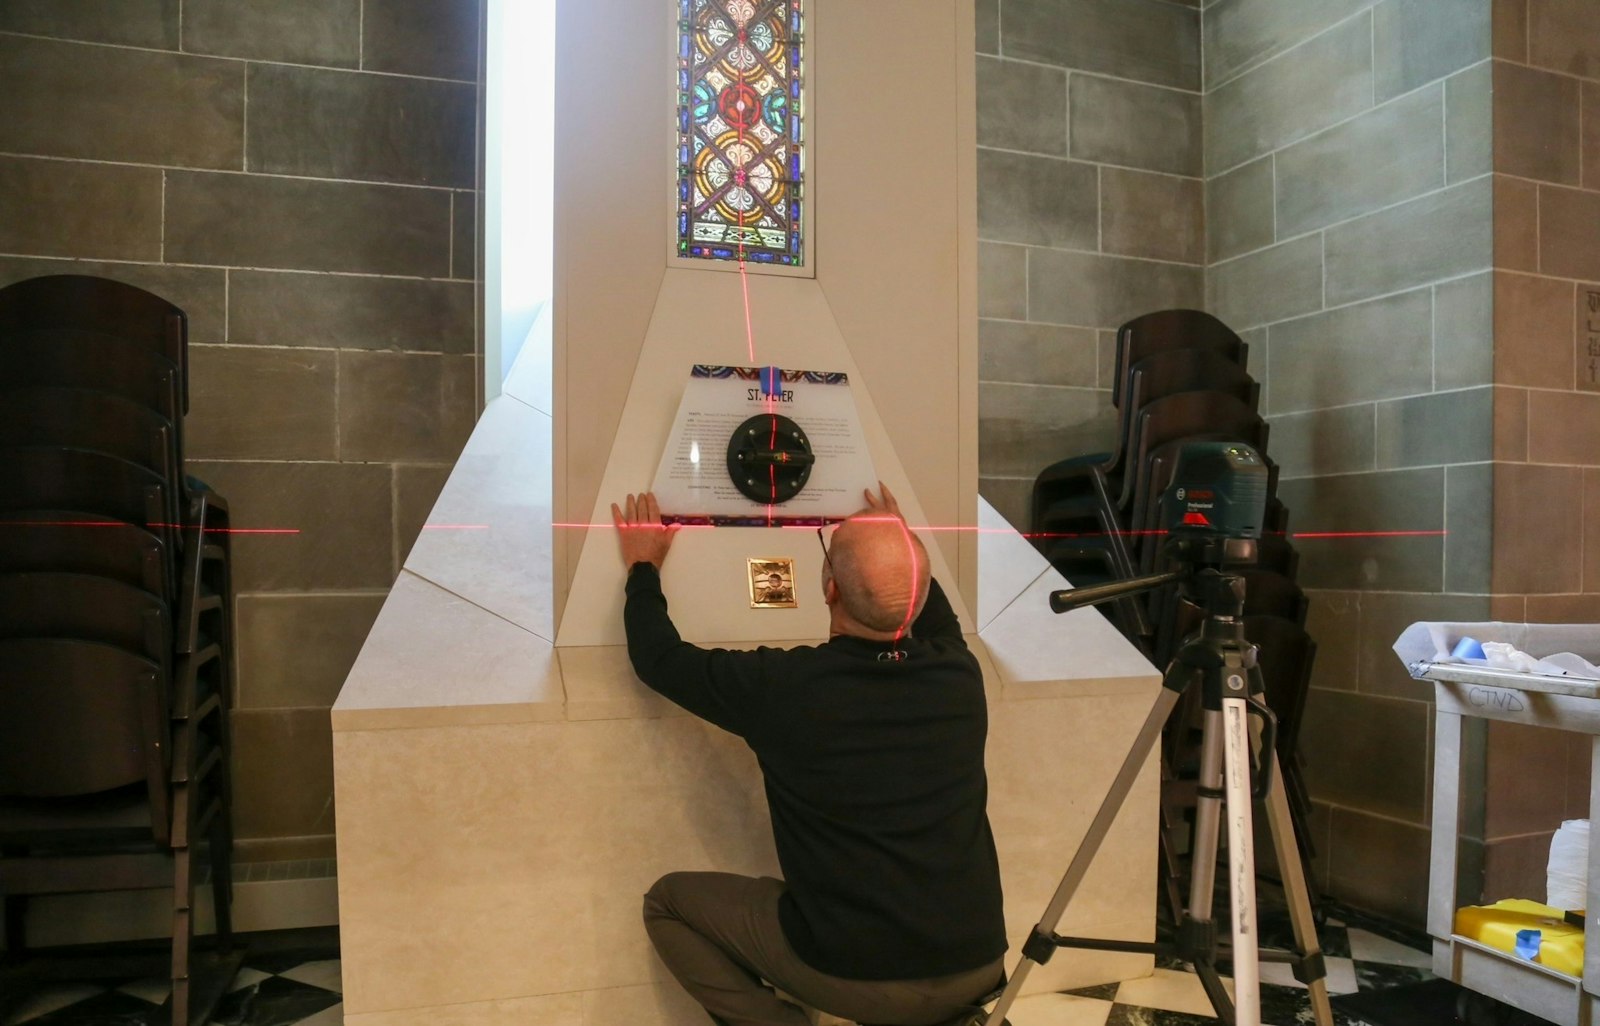 Keith Calleja began installation of relics on Jan. 8, 2024, starting with the relic of St. Philip.